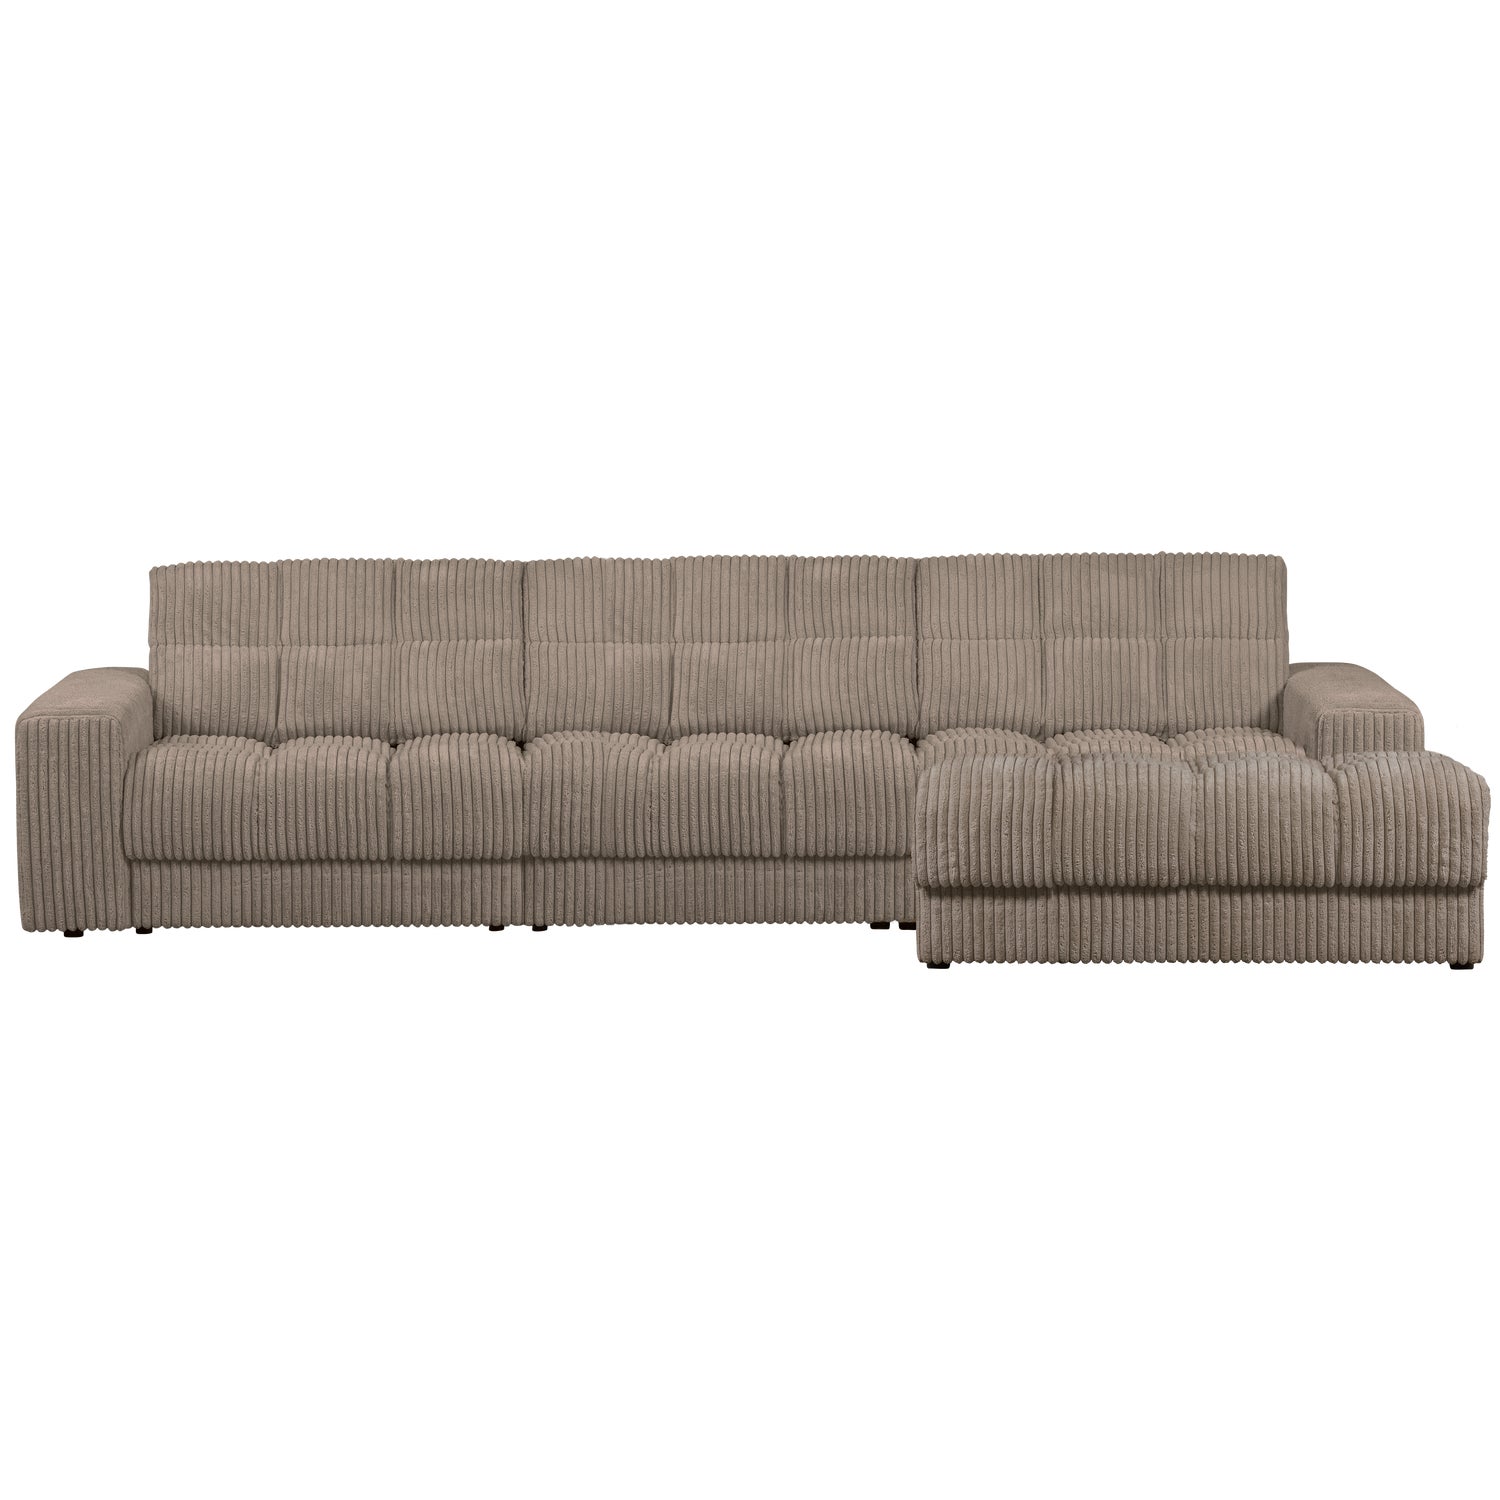 379013-RM-01_VS_WE_Second_date_chaise_longue_rechts_grove_rinstof_mud.png?auto=webp&format=png&width=1500&height=1500